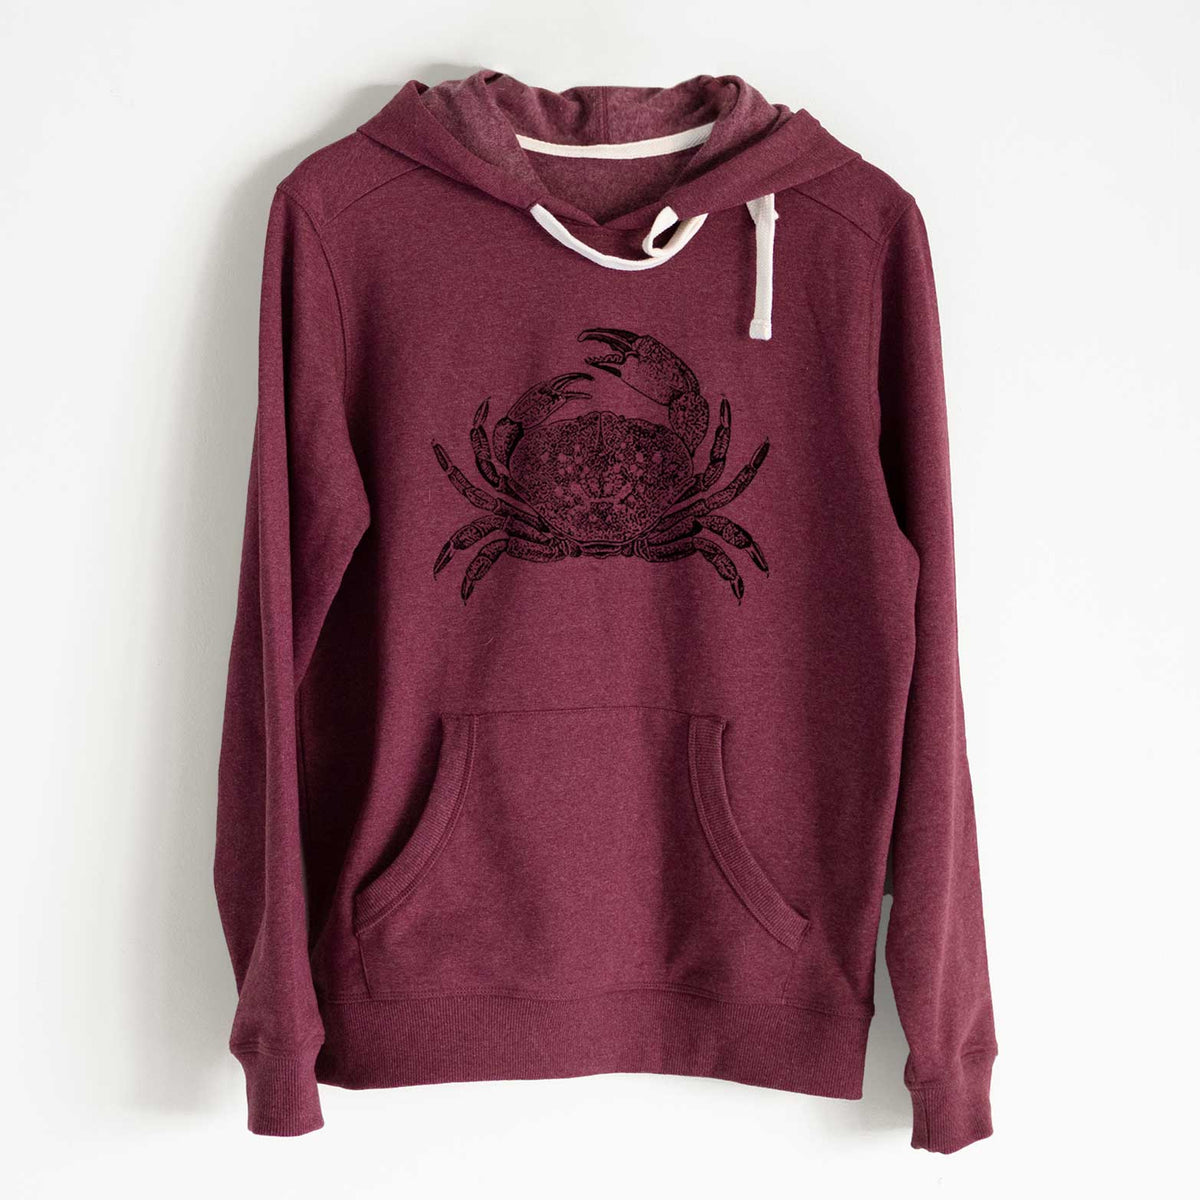 Dungeness Crab - Unisex Recycled Hoodie - CLOSEOUT - FINAL SALE